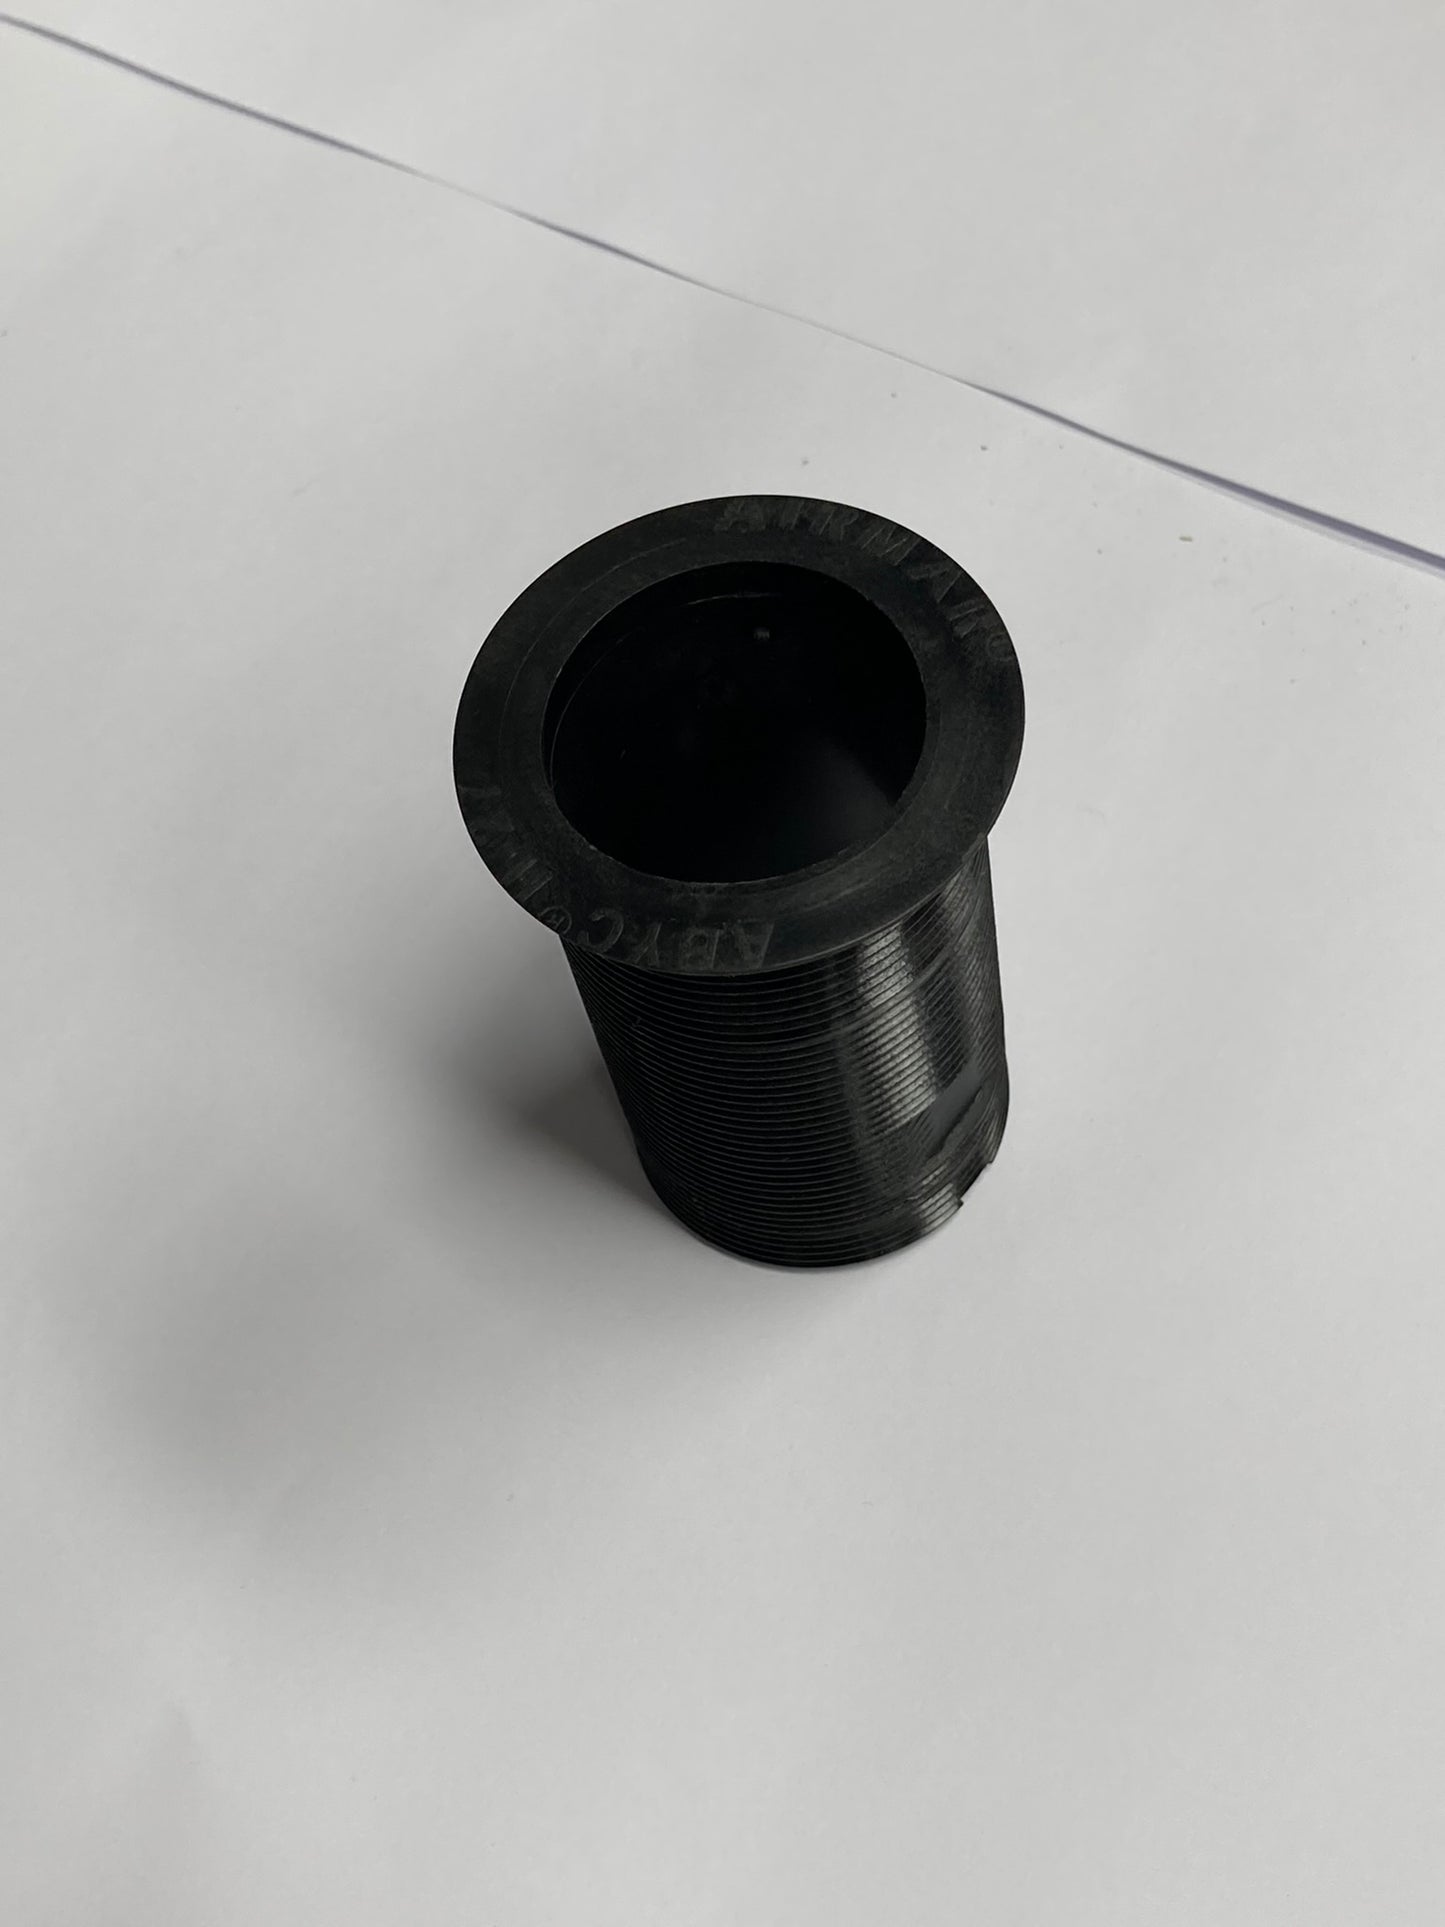 Standard through hole transducer fitting with flap